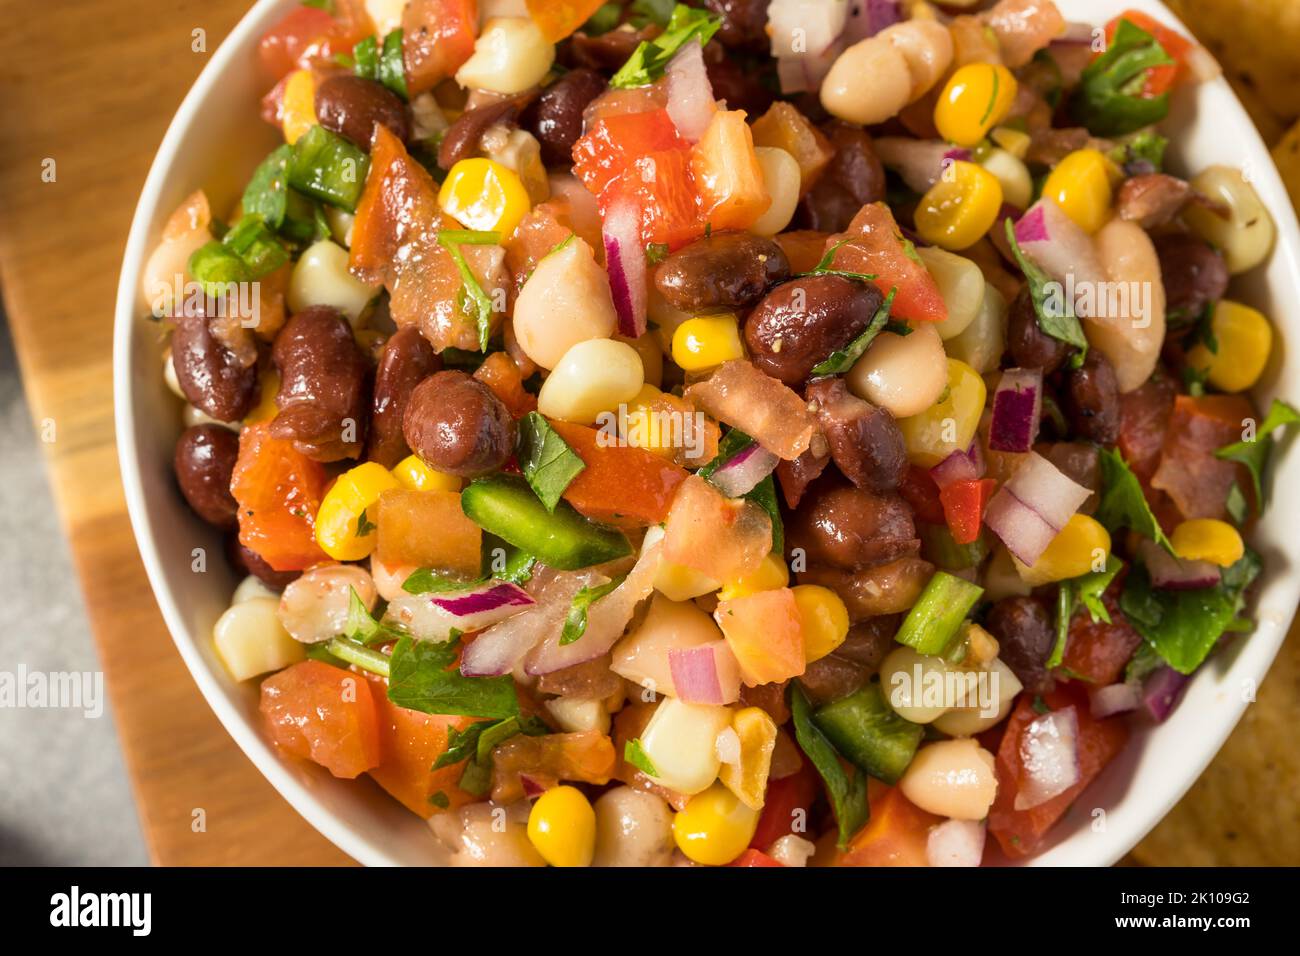 Homemade Organic Cowboy Caviar Dip with Corn Beans and Chips Stock Photo